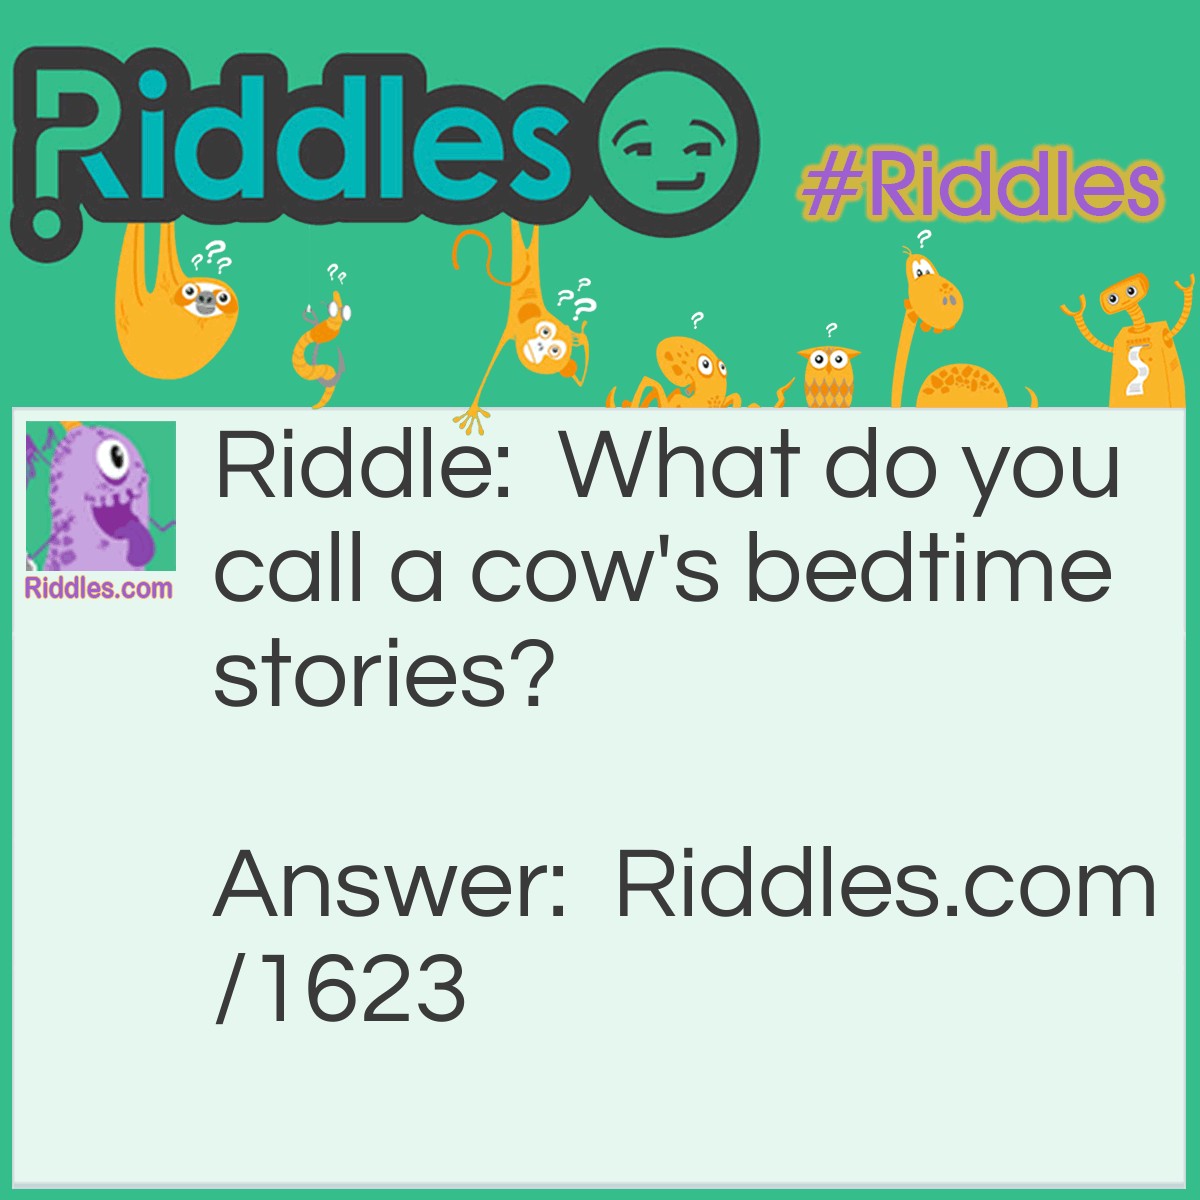 Riddle: What do you call a cow's bedtime stories? Answer: Dairy tales.